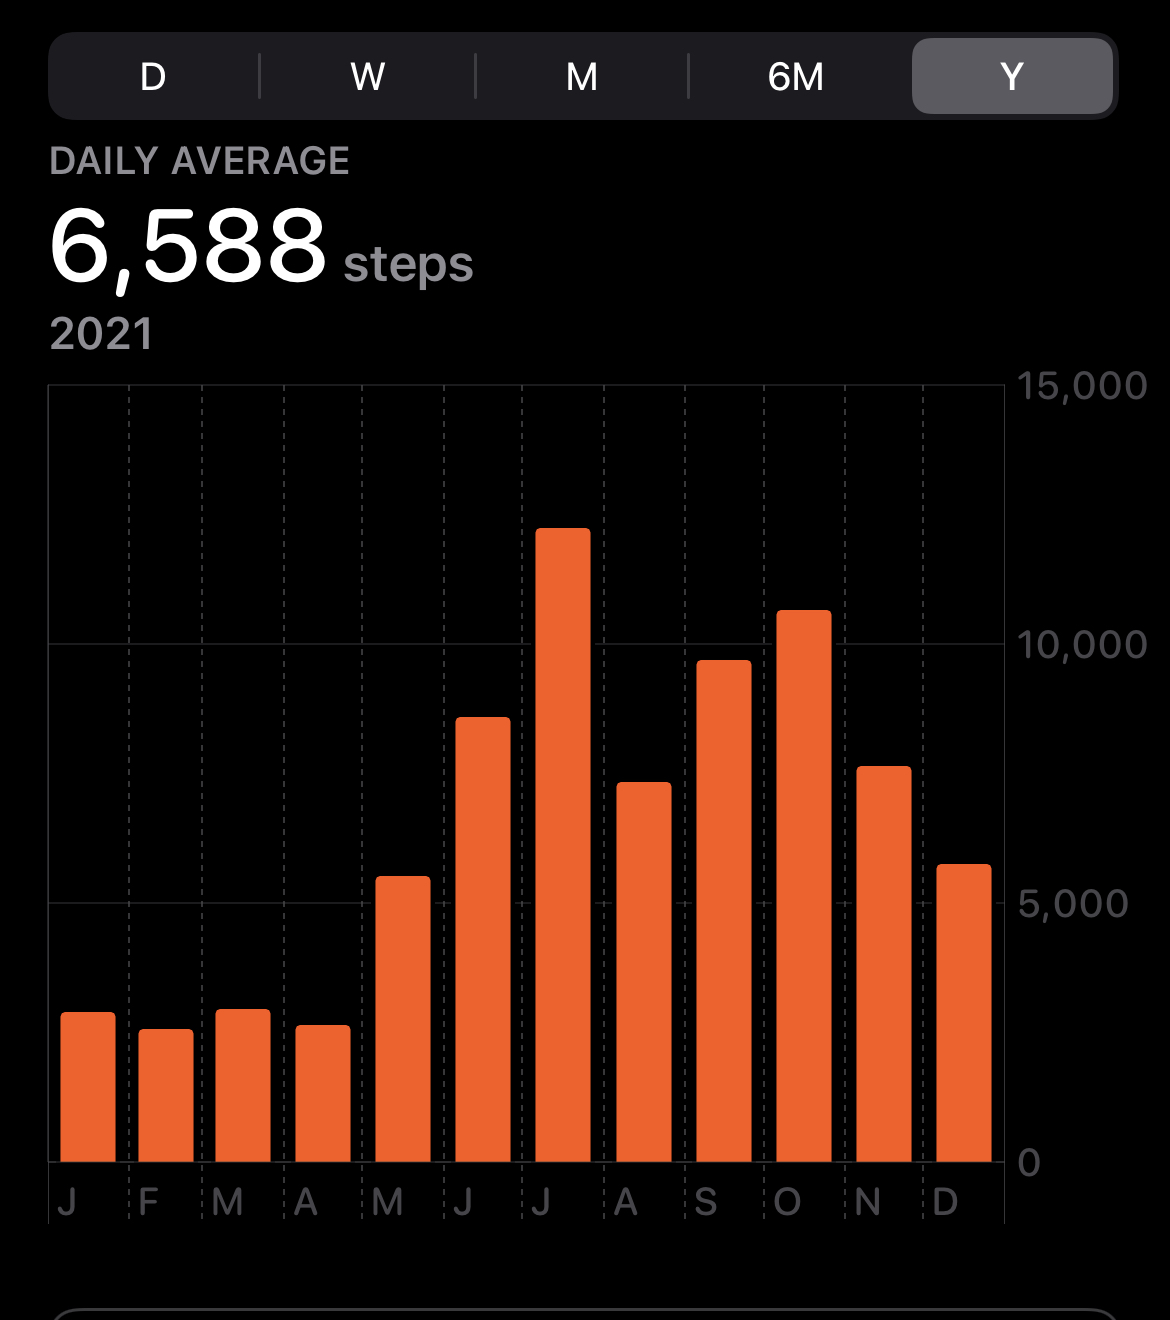 a bar graph showing the average steps I took per month in 2021. It has a rough bell curve, with the highest steps in the summer months, more in the fall months than the jan-apr winter months, with a downward trend near the end of the year as we hit winter again.